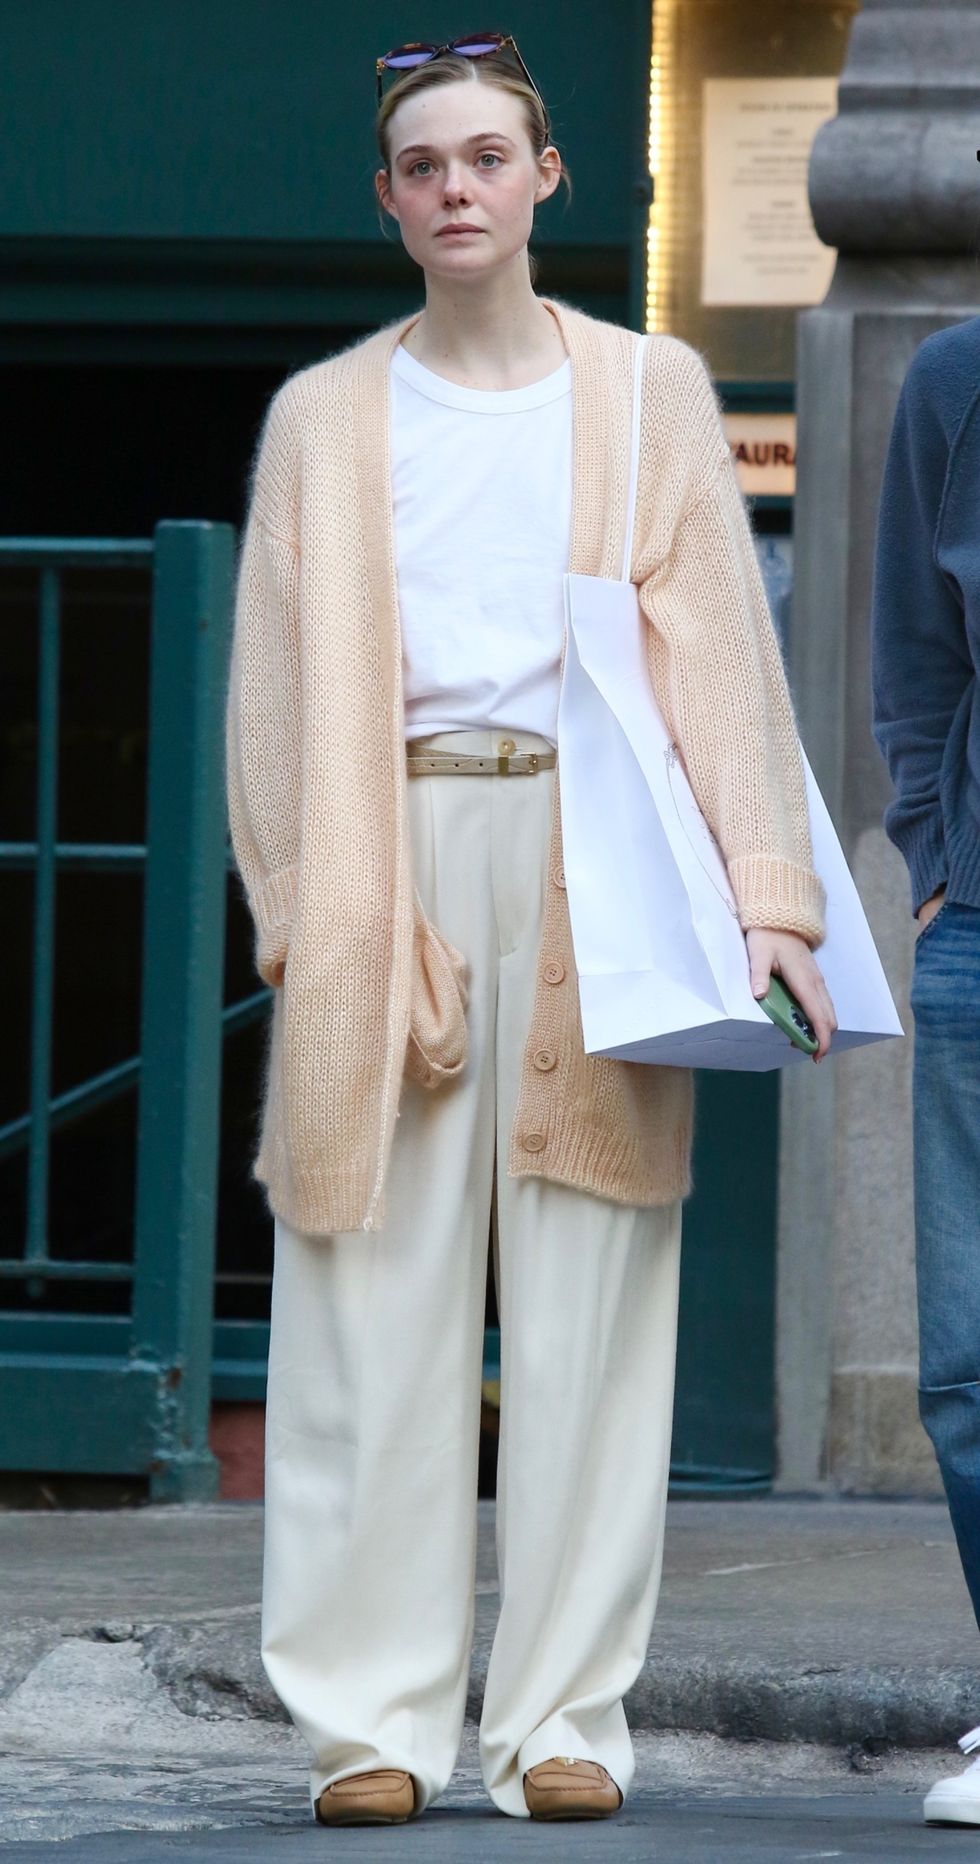 Elle Fanning’s Creamy Peach Cardigan Is Why This Outfit Works